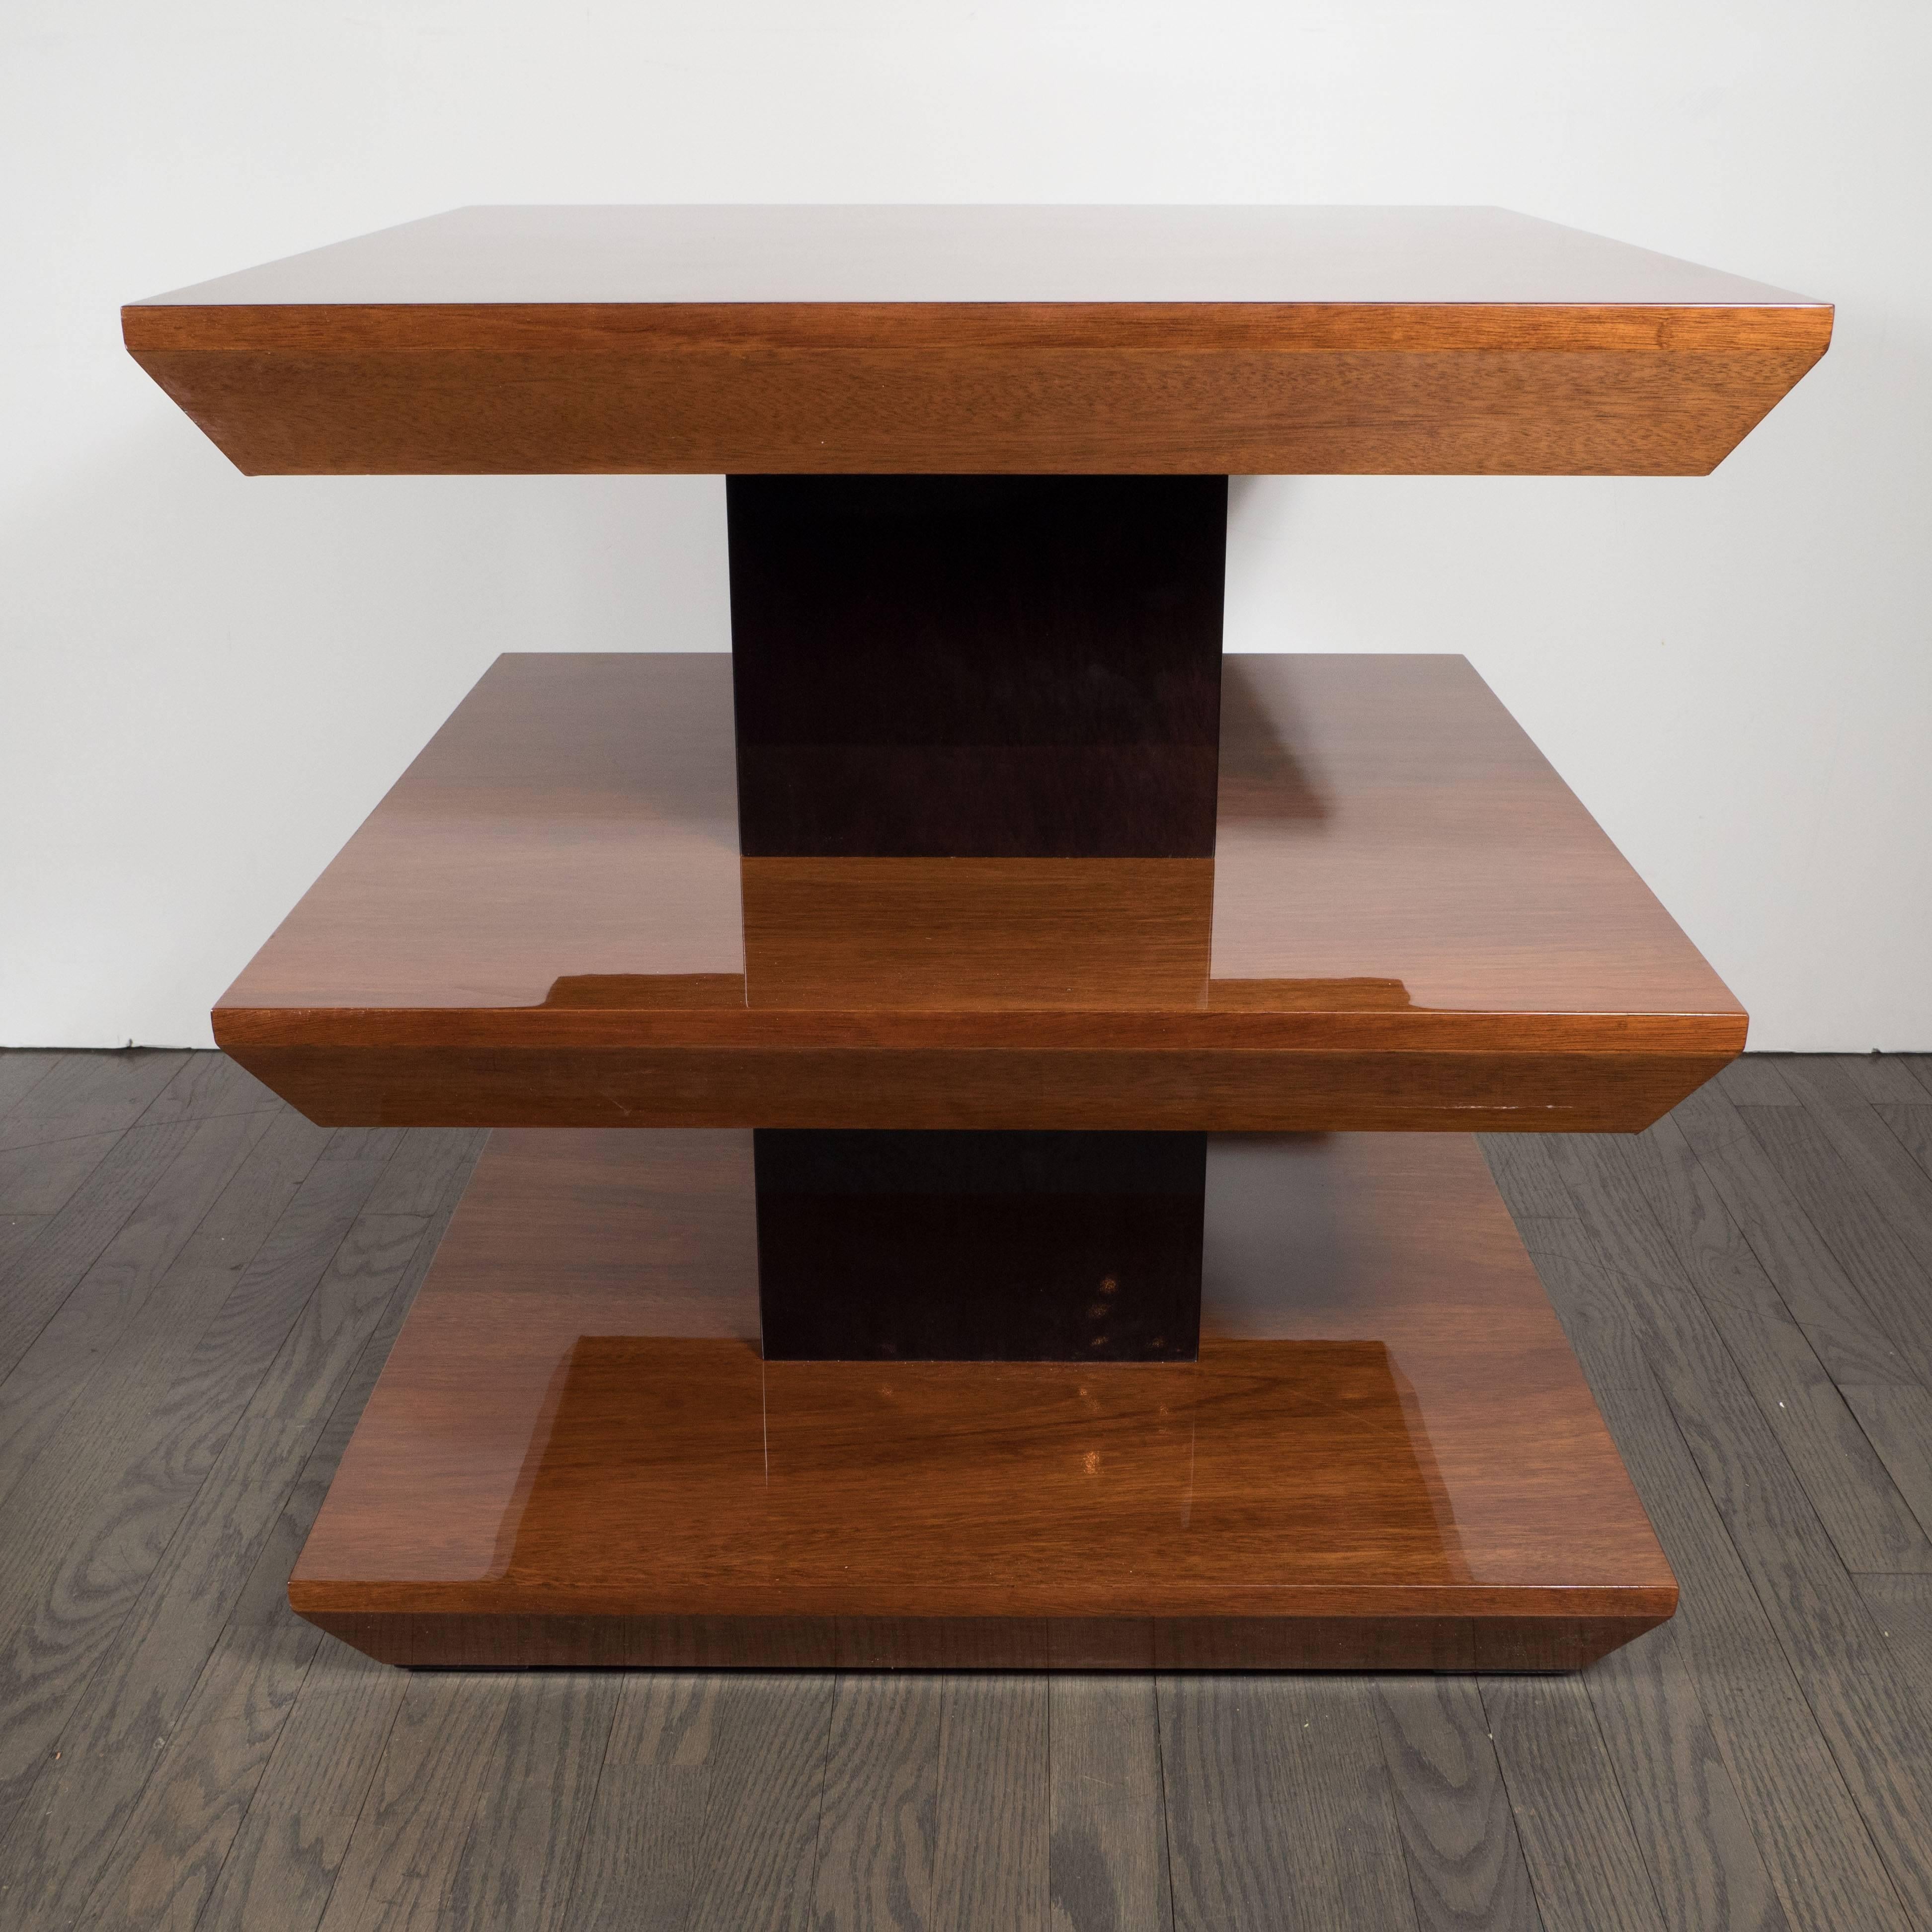 This elegant skyscraper style side table was realized in France, circa 1935, at the height of Art Deco. It features three square tiers that recede downwards at angle from their squared off perimeters suggesting inverse pyramidal forms. The tops have